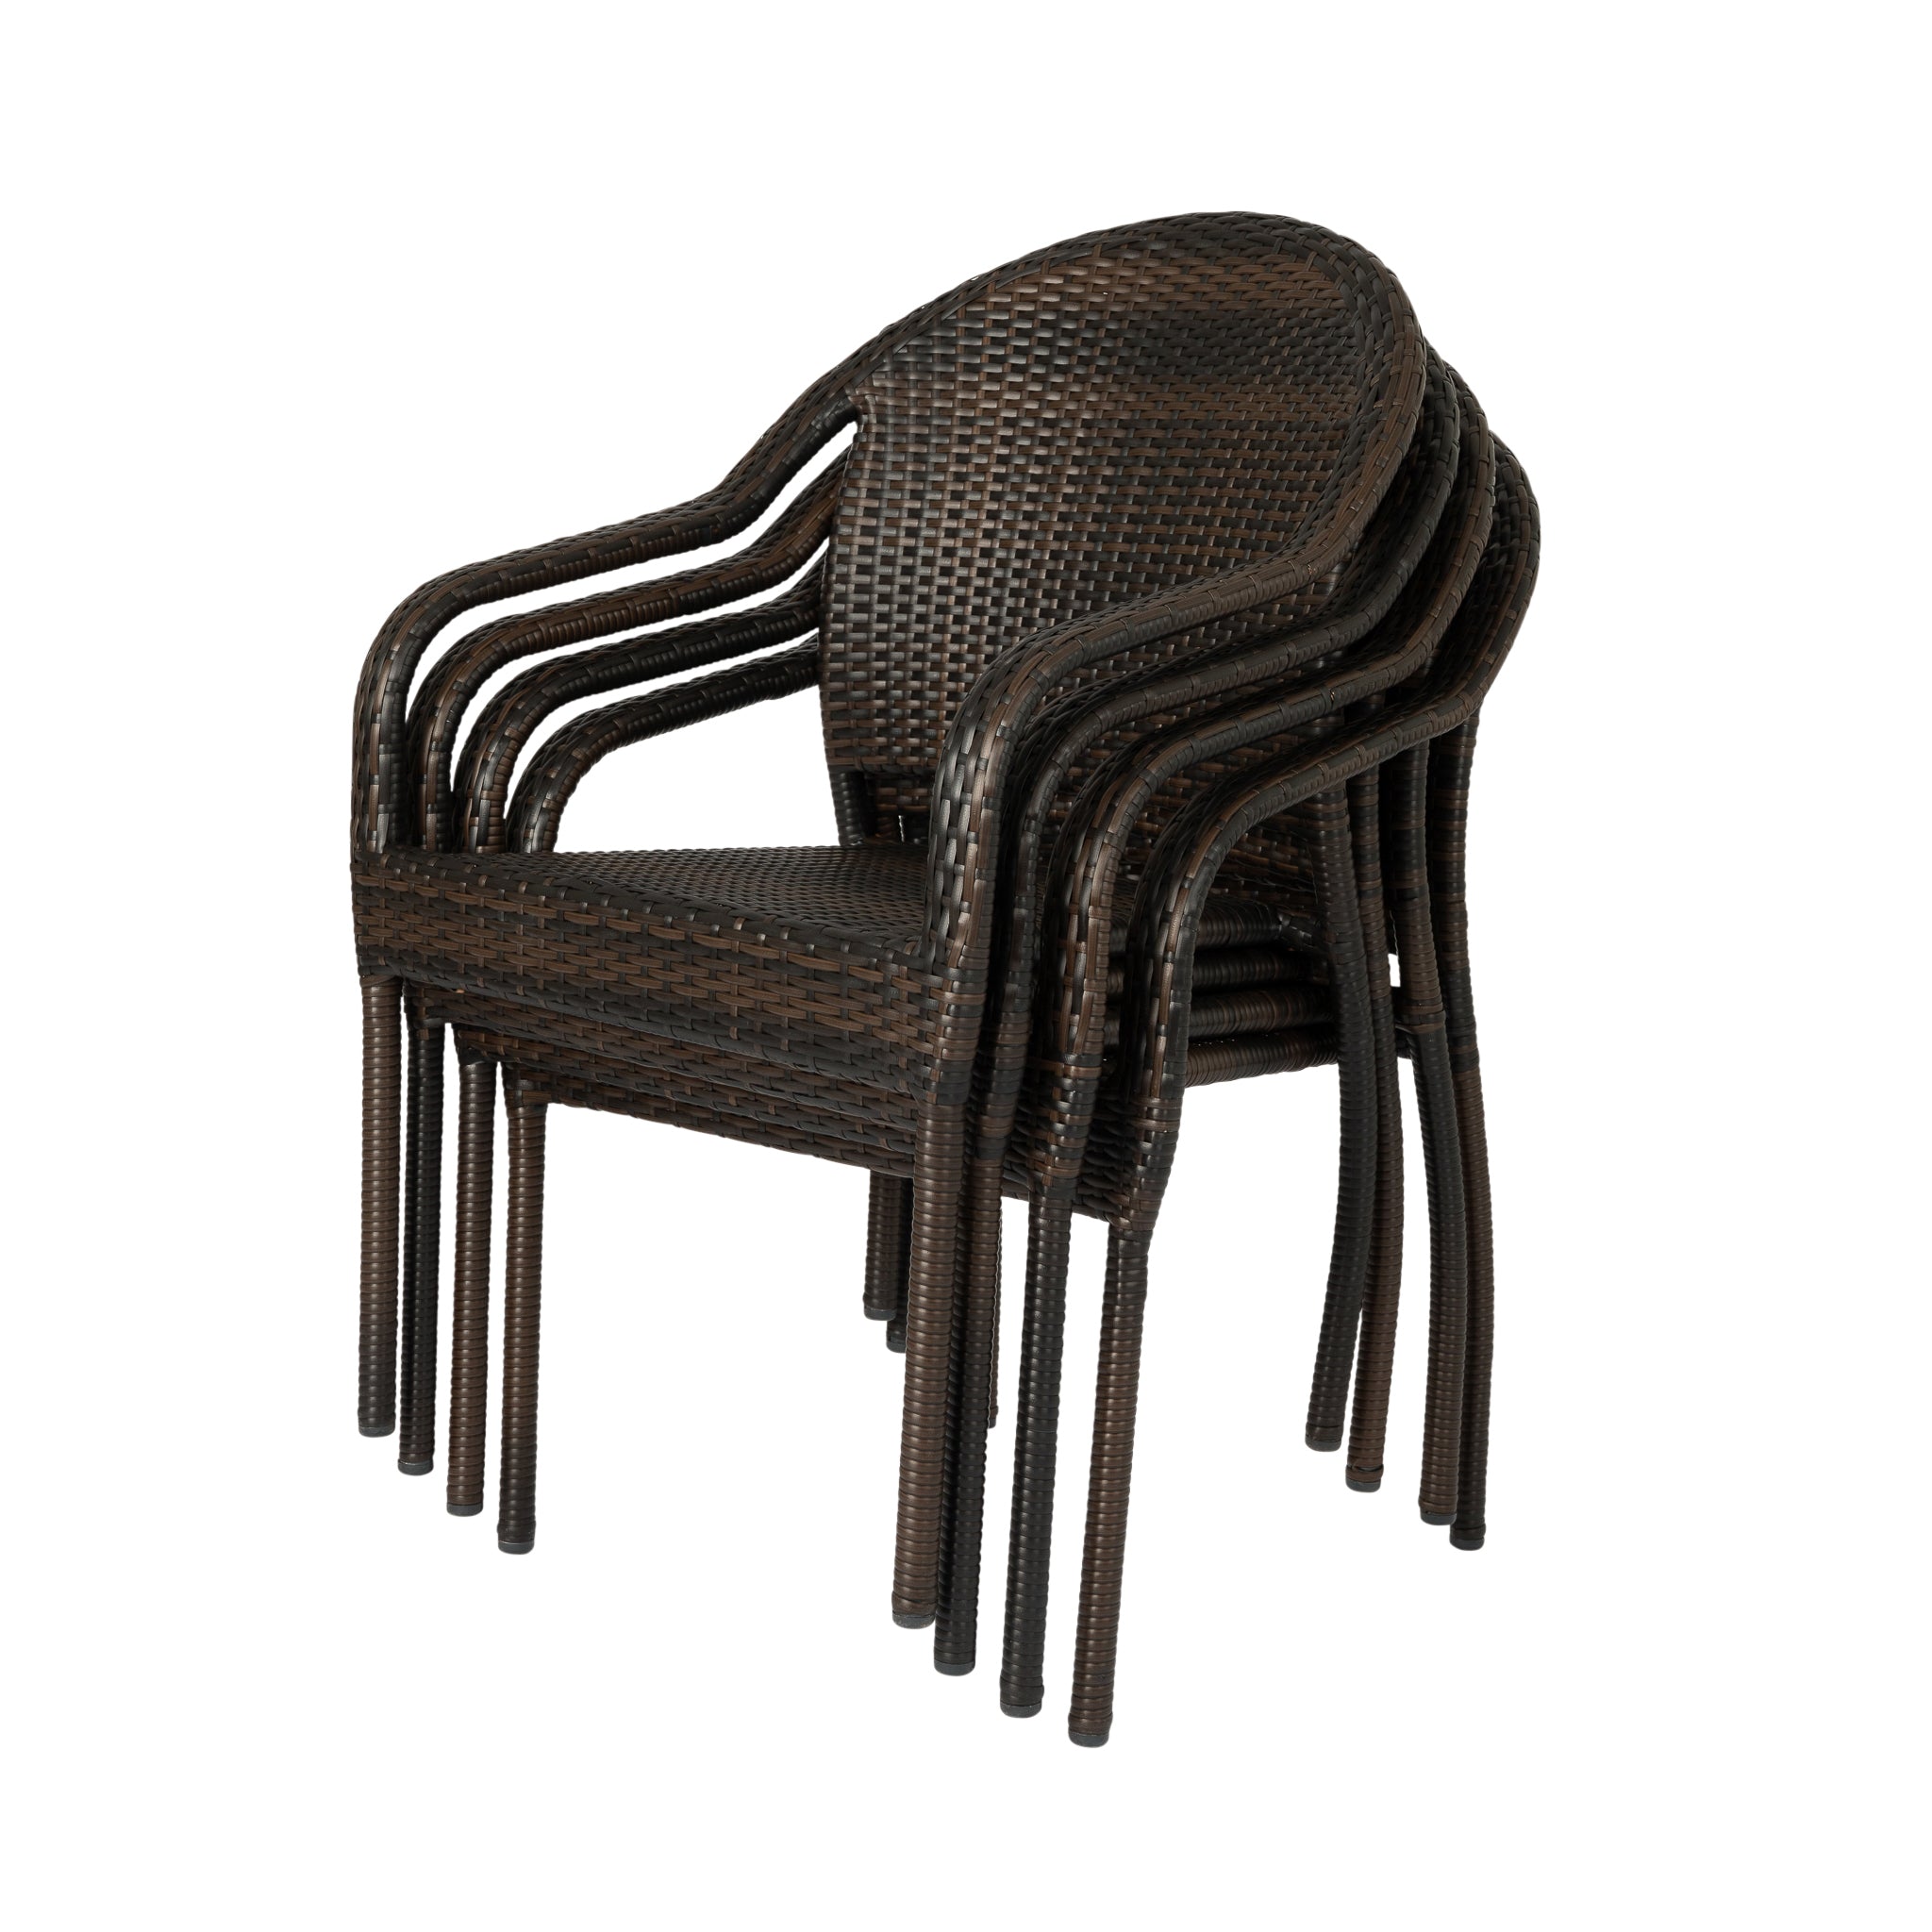 Rhodos Café Stacking Chairs Mocha Wicker in of All-Weather Set 4 